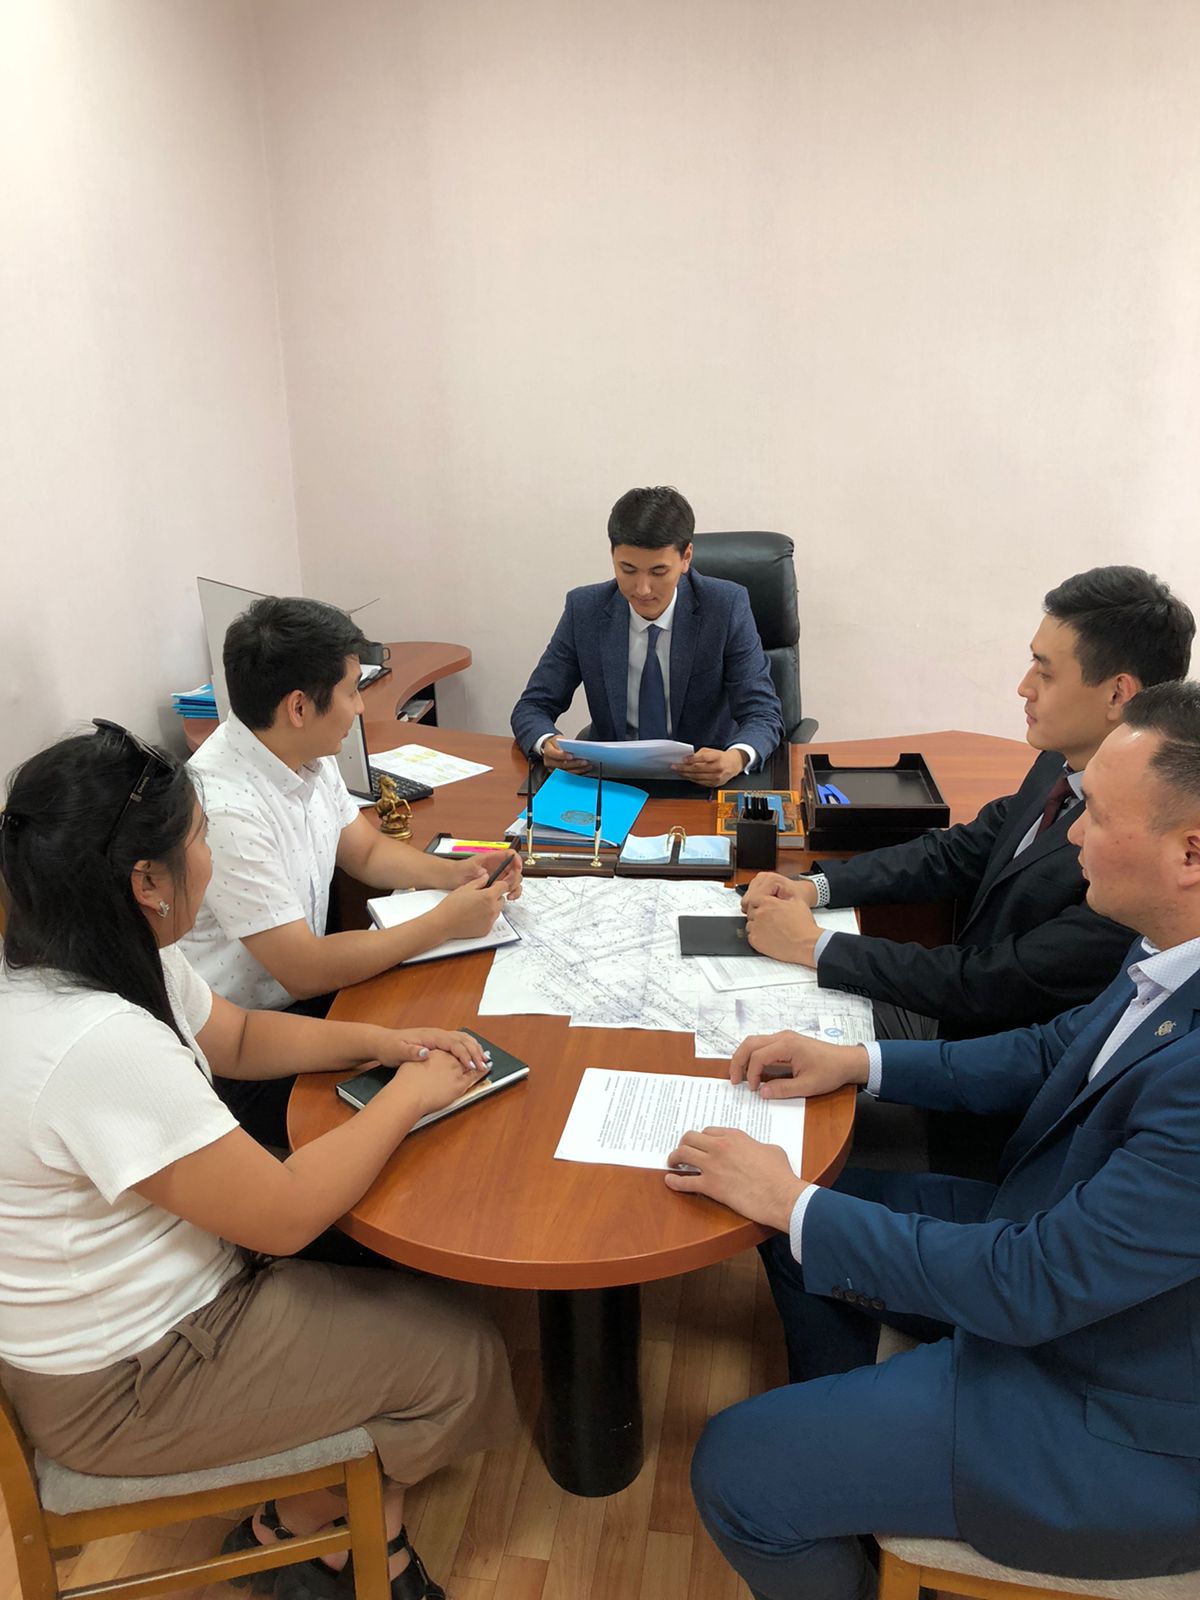 On June 20 of this year, the Department of Construction, Architecture and Urban Planning of the East Kazakhstan region